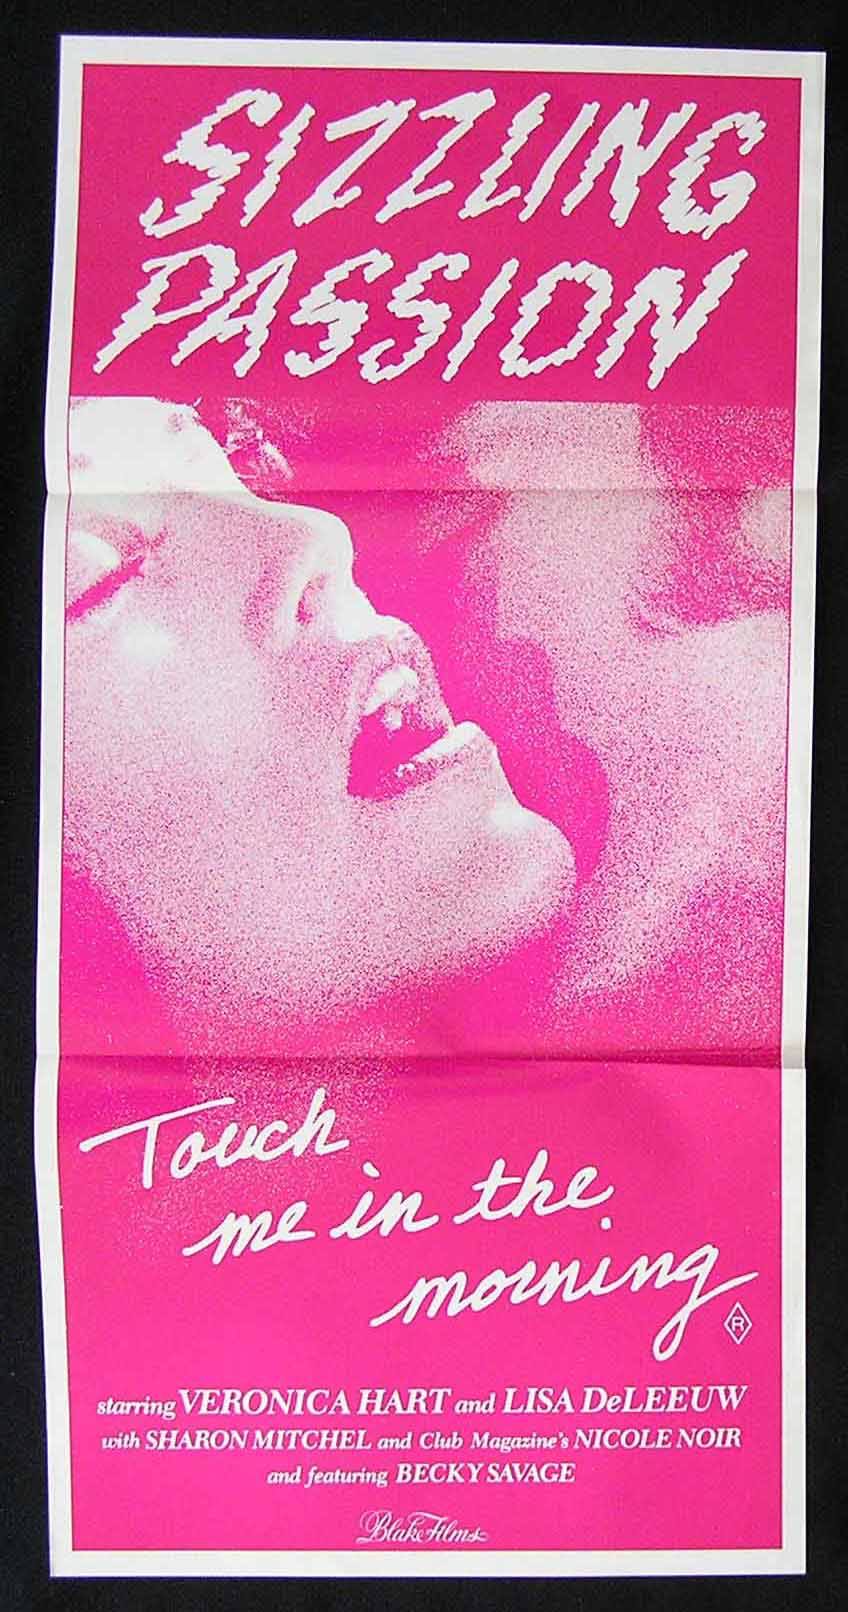 TOUCH ME IN THE MORNING ’81 Veronica Hart-Sharon Mitchell Sexploitation Movie Poster